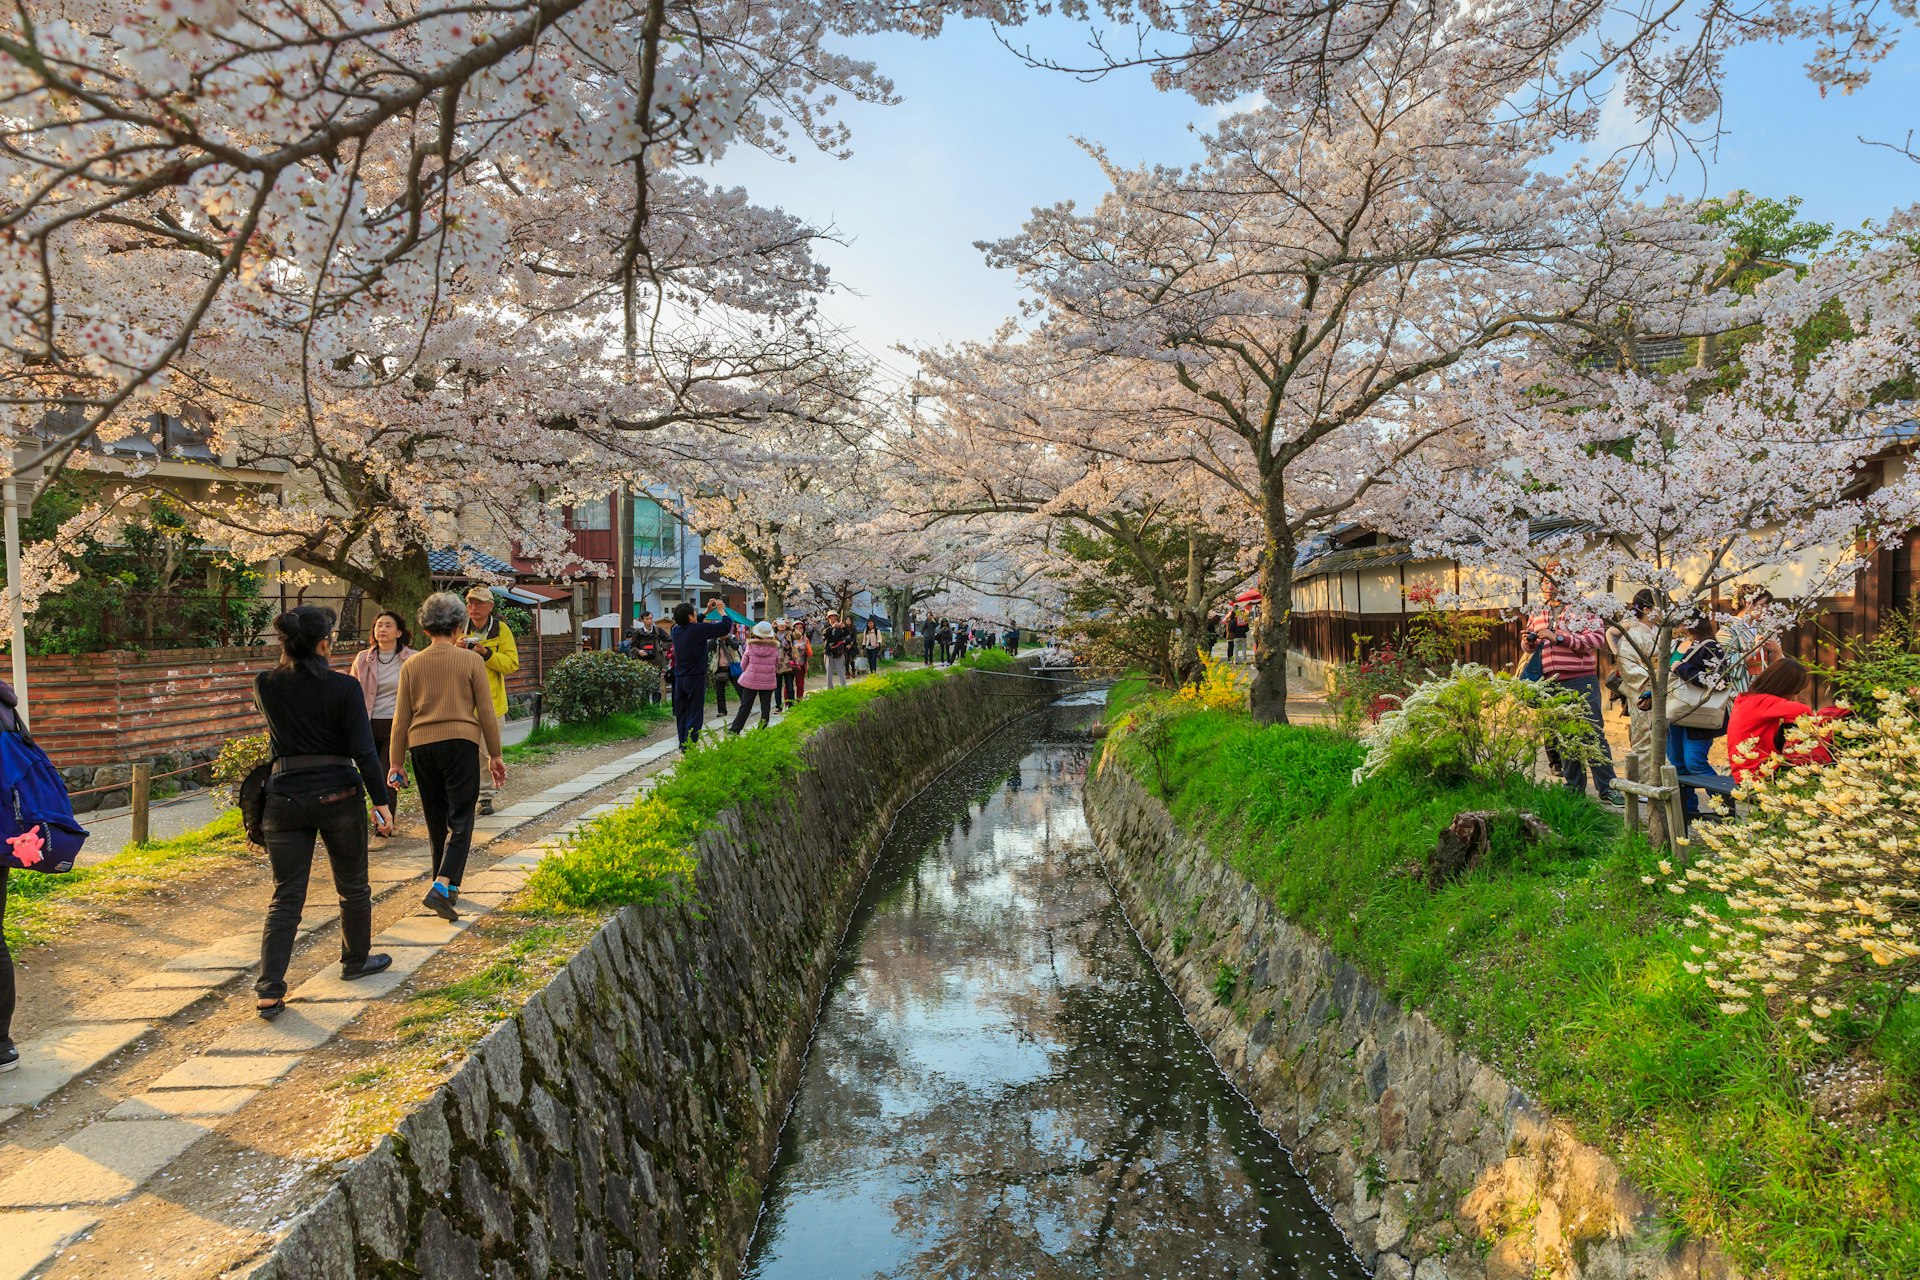 Tourists enjoy Cherry blossoms on the Path of Philosophy in Kyoto 